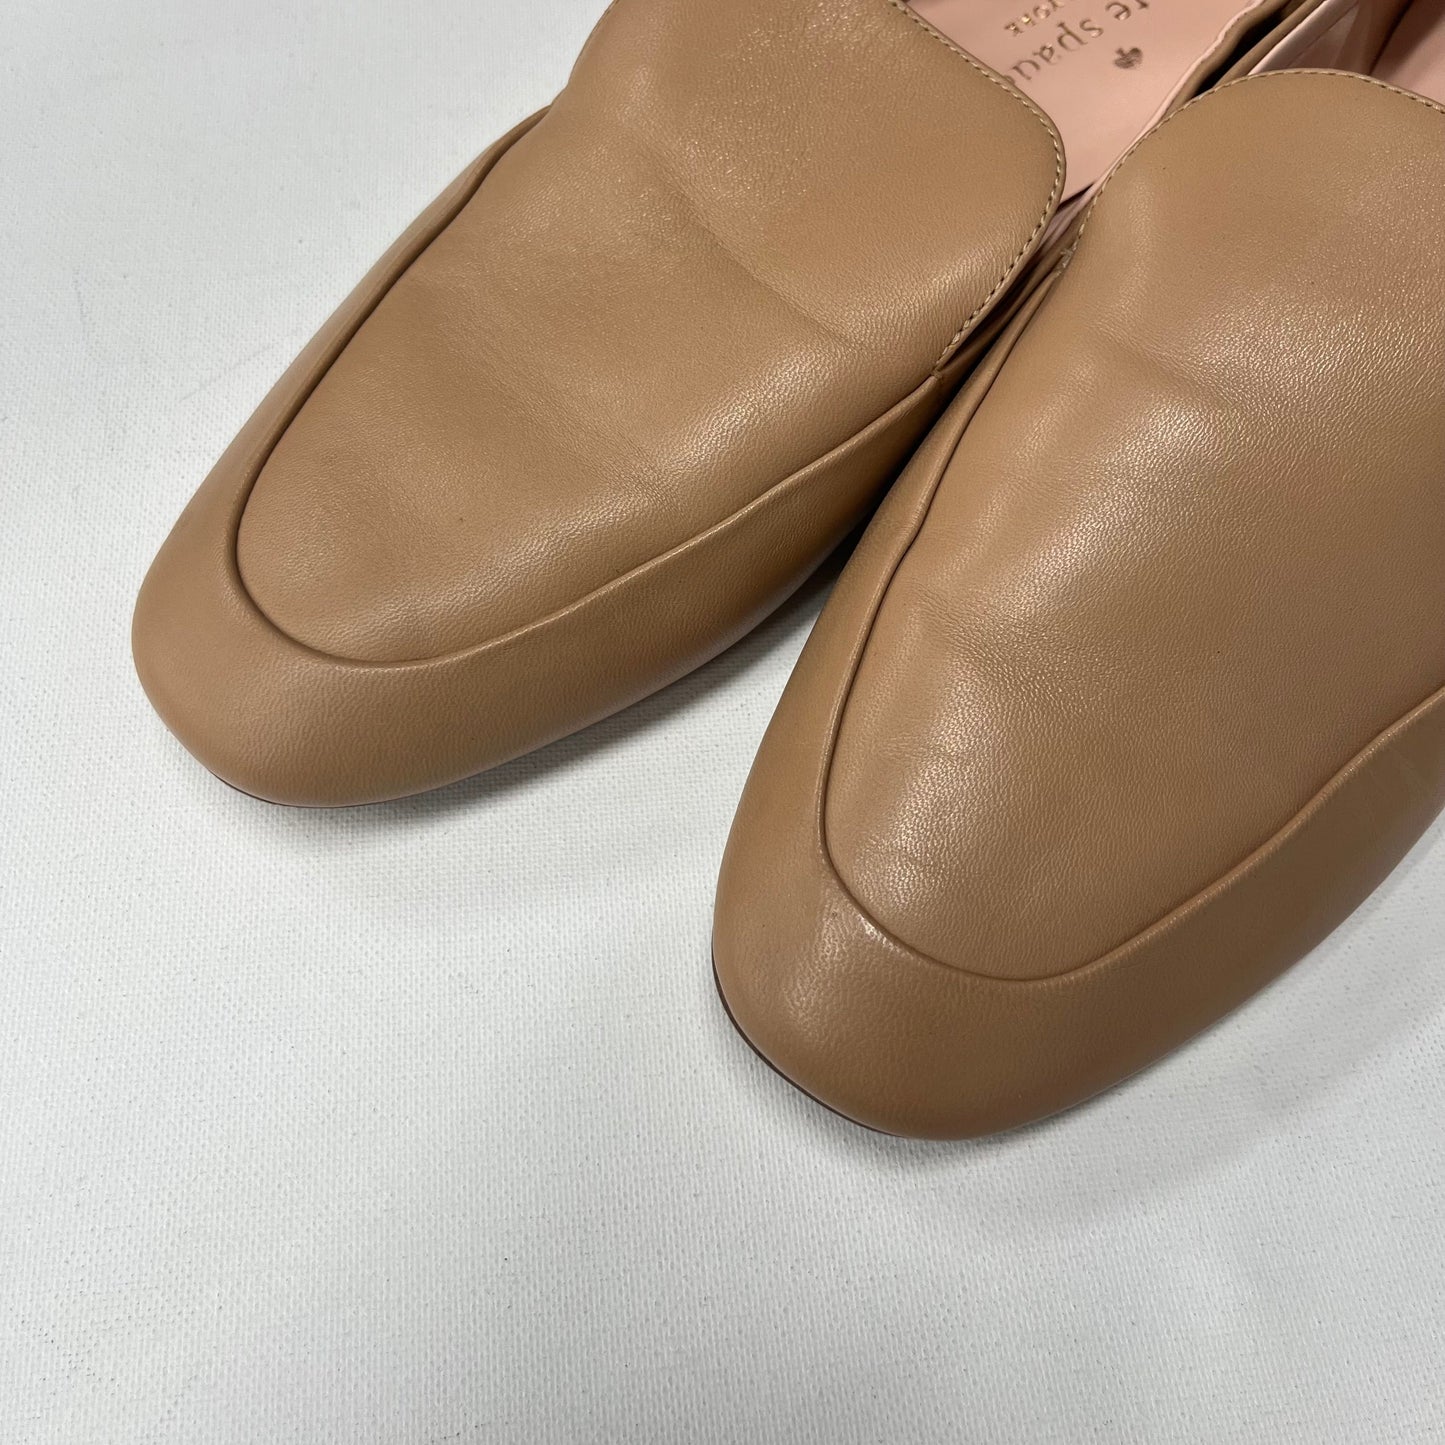 Shoes Flats Loafer Oxford By Kate Spade  Size: 9.5